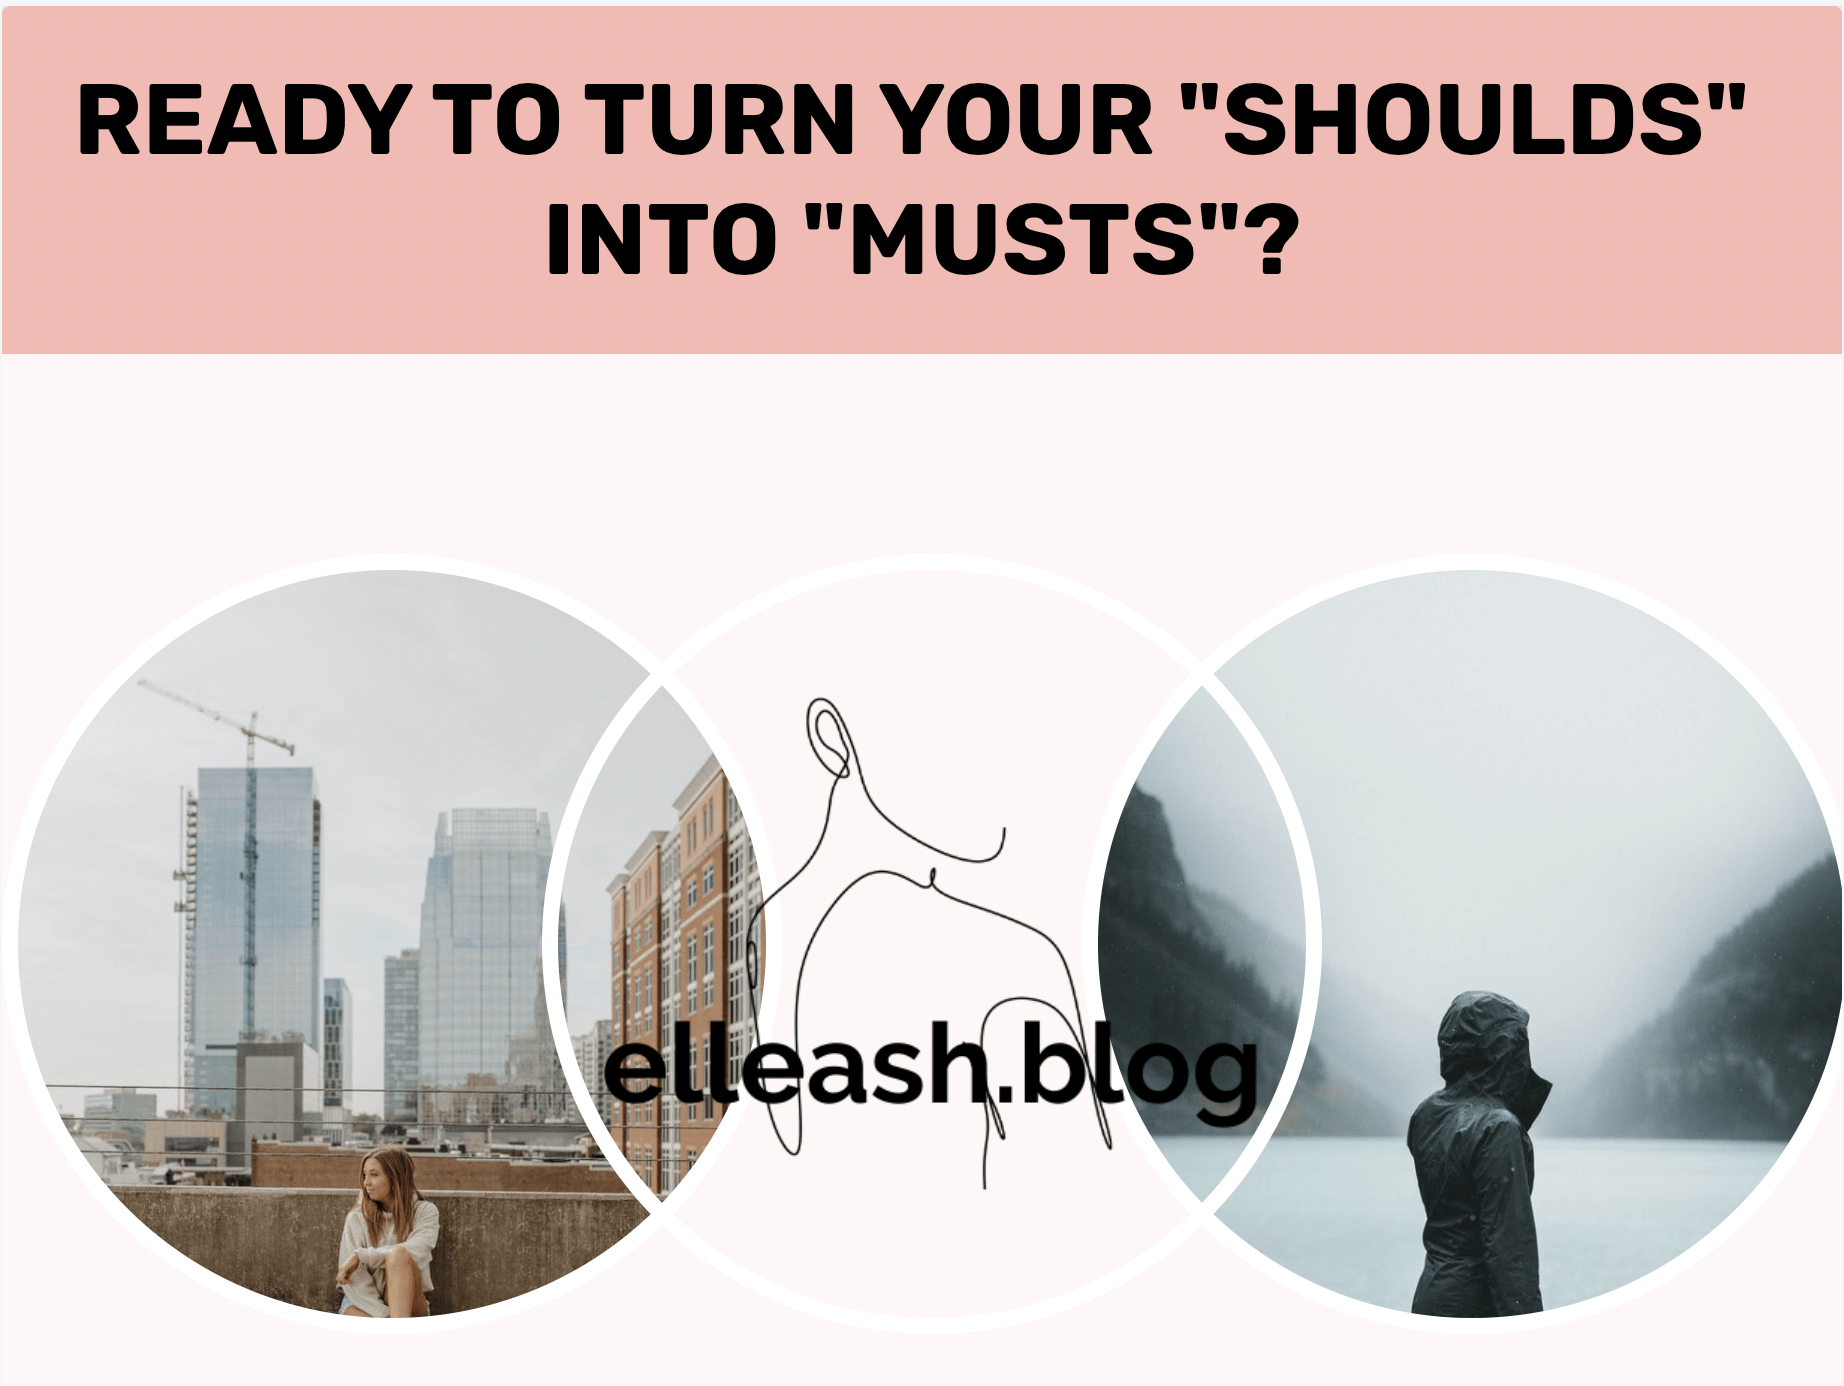 ready-to-turn-your-should-into-musts